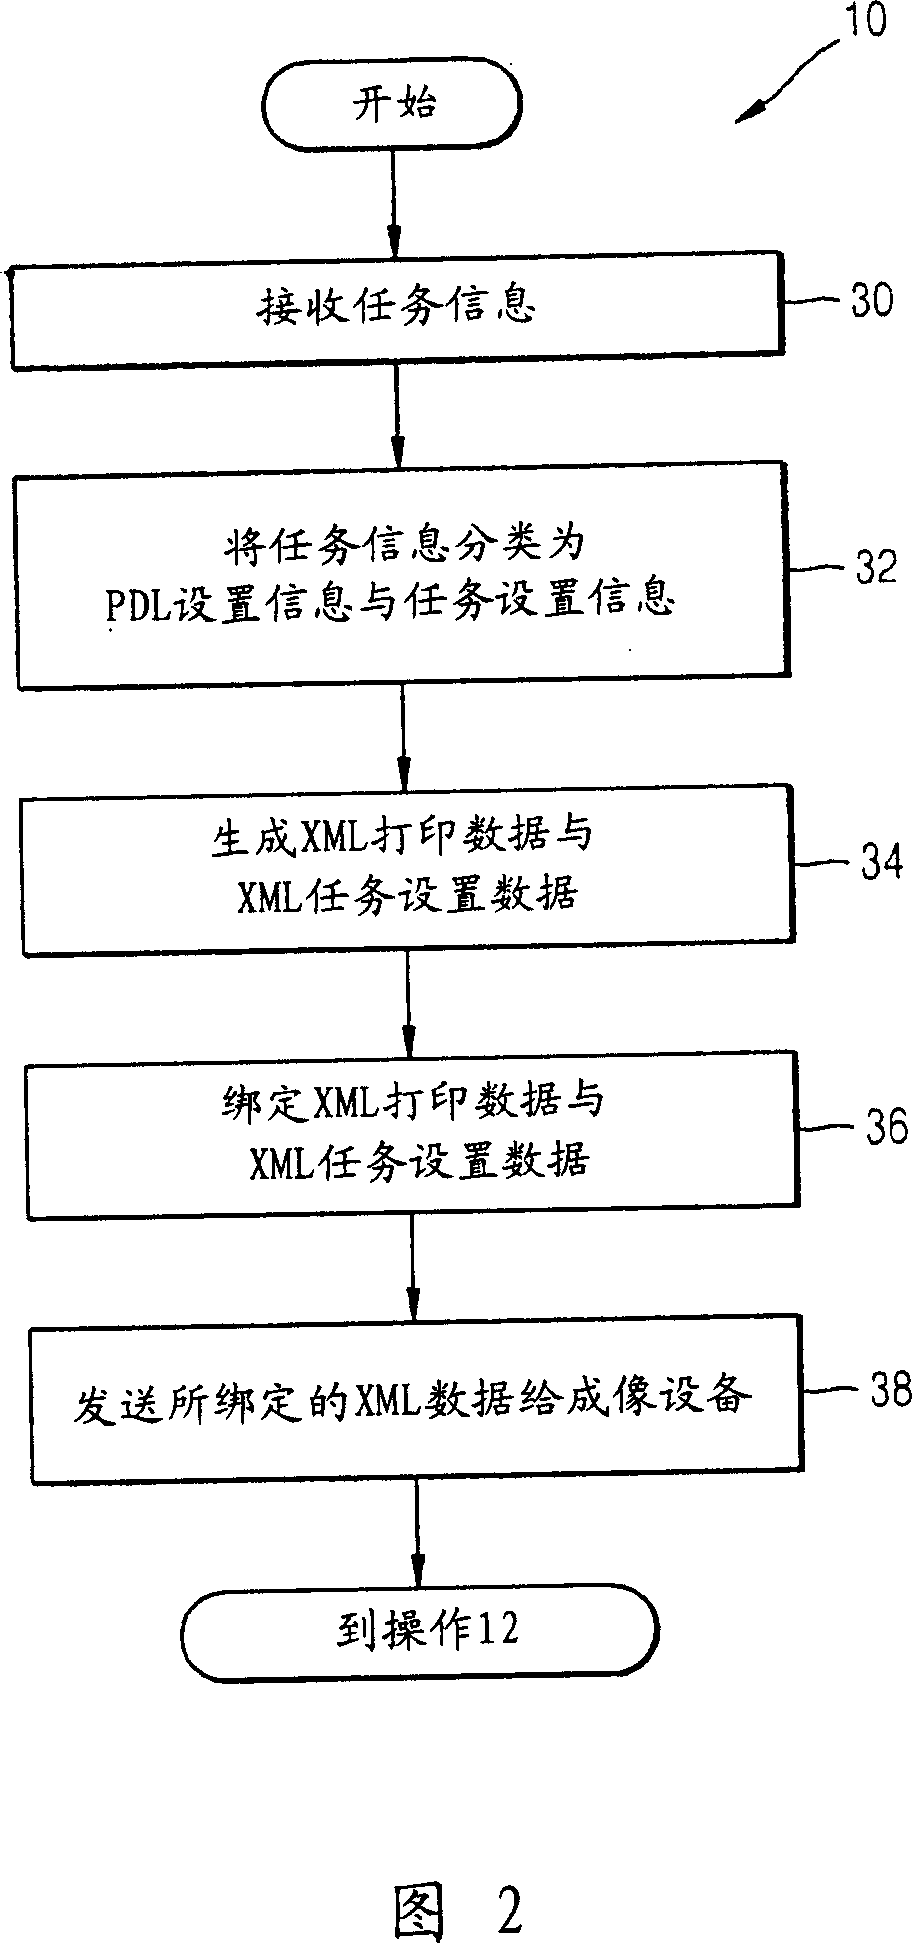 Method and system to form image using xml data